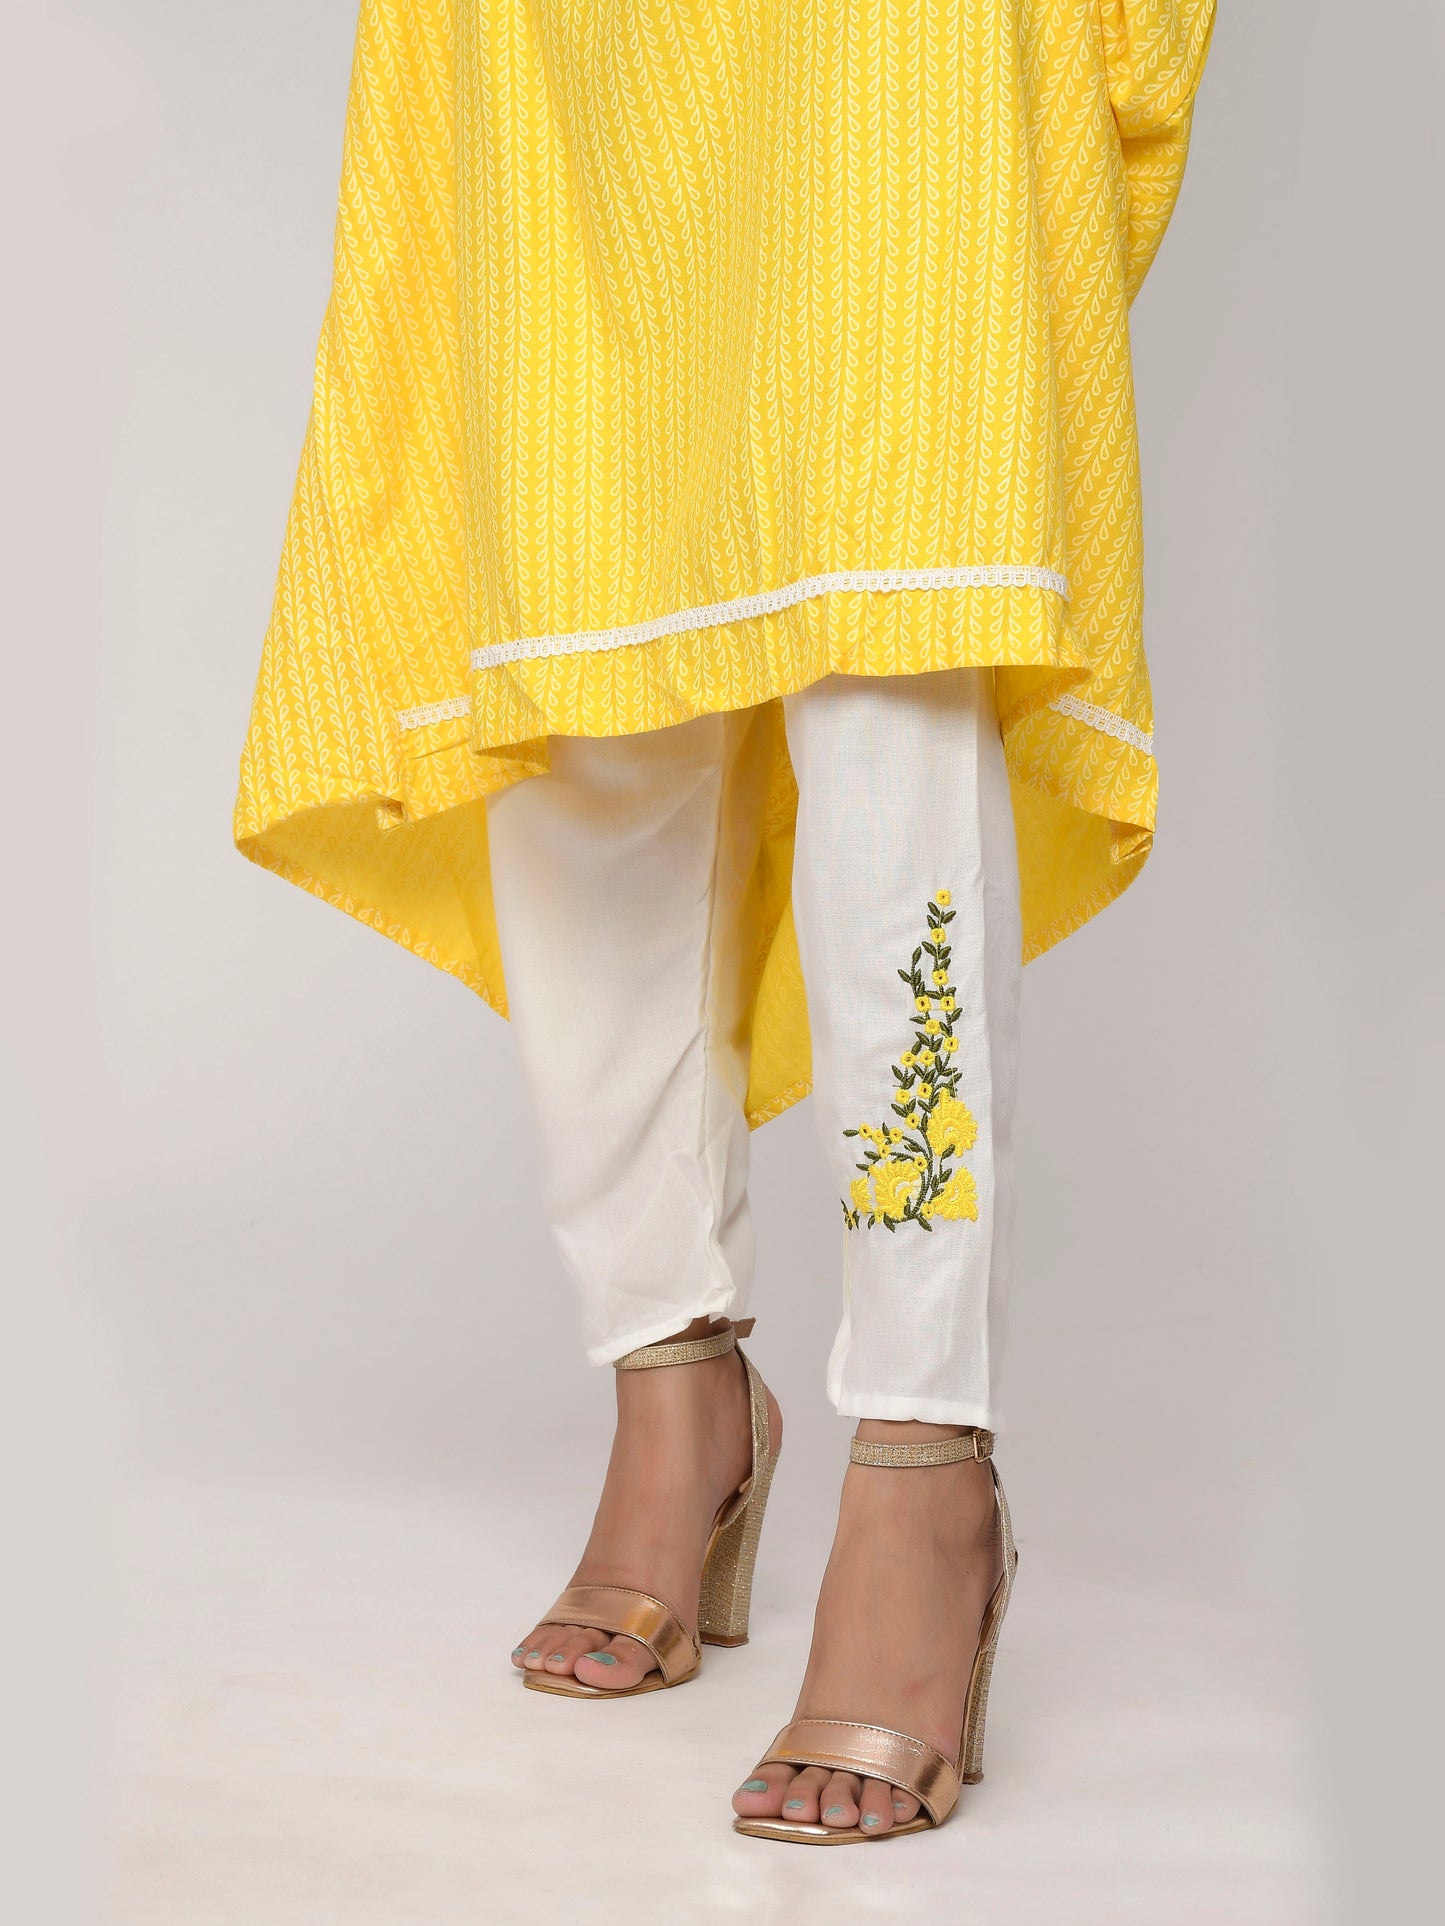 Yellow and White Colored Printed Kurta With Trouser.